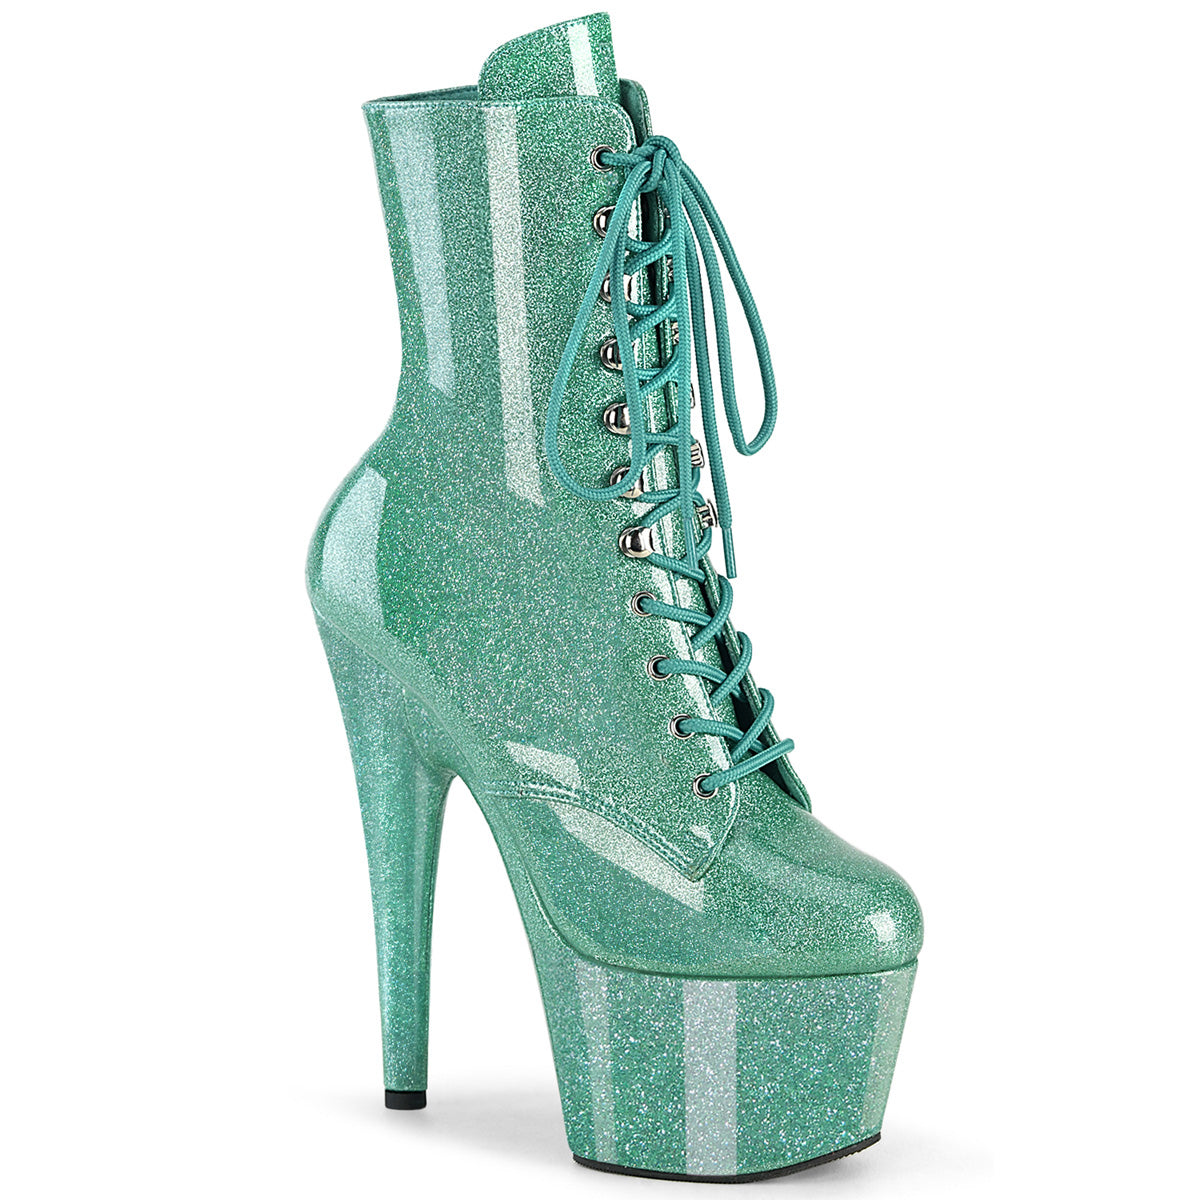 7 Inch Heel Glitter Boots with Lace-Up Front